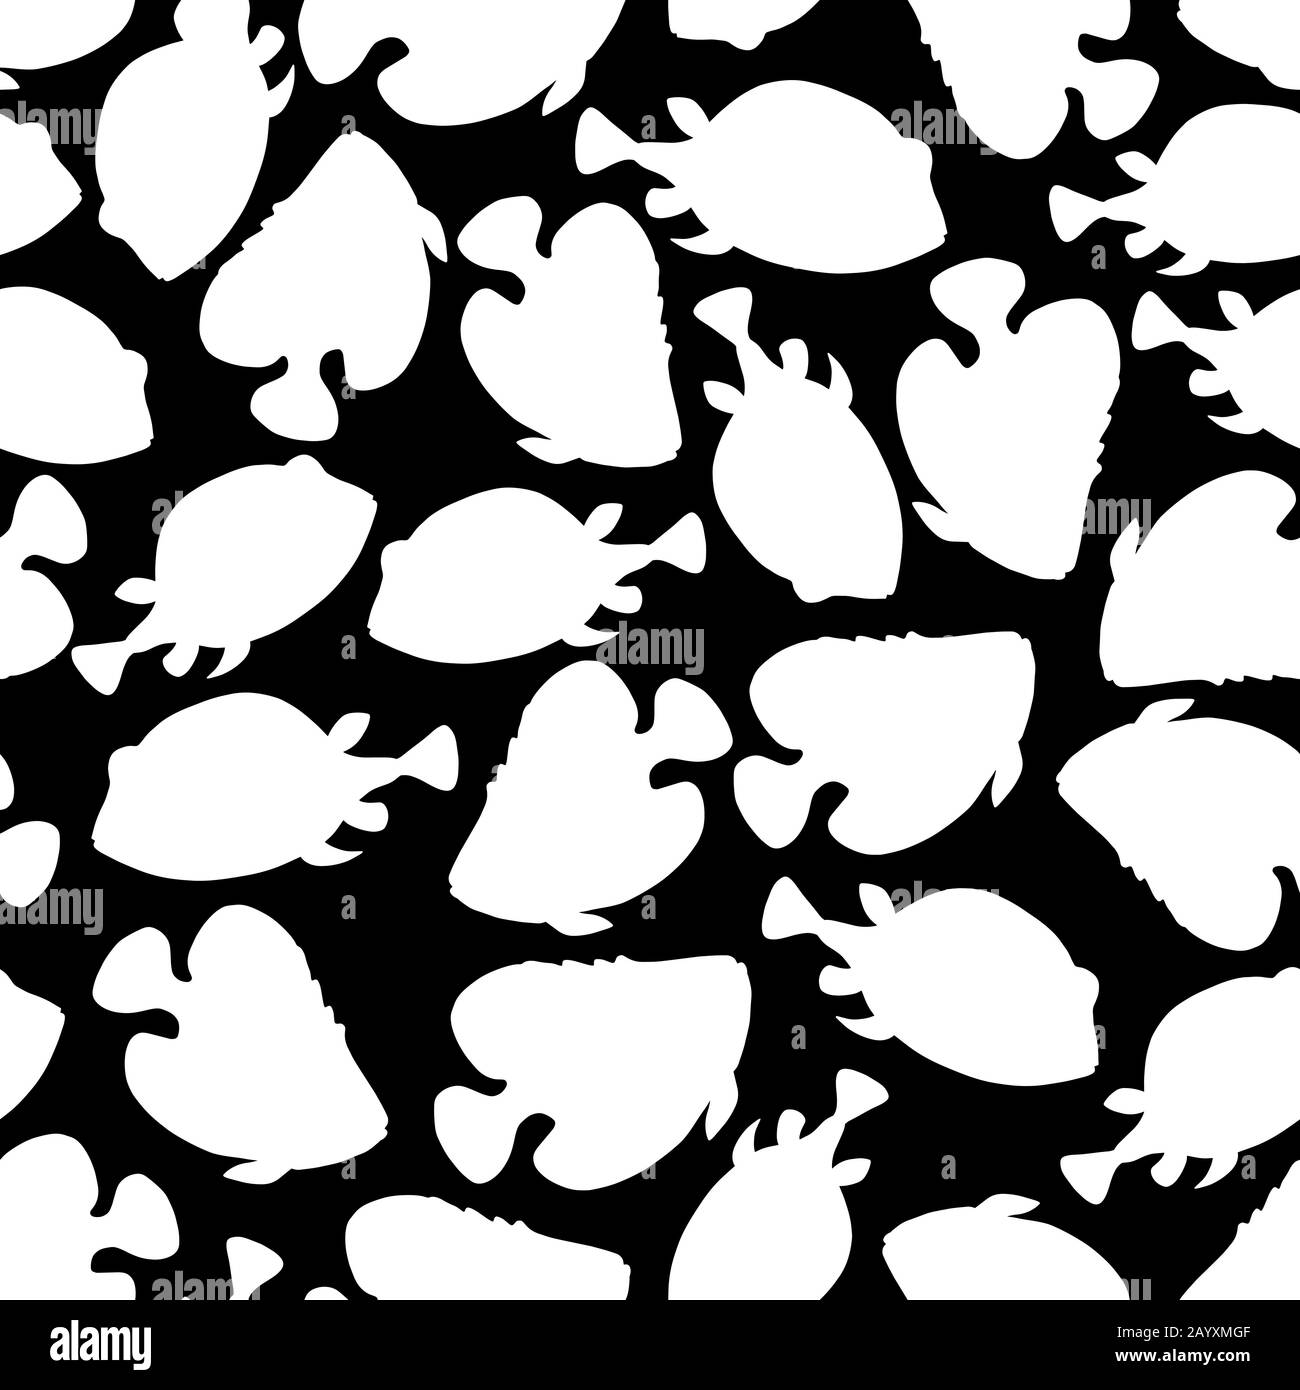 Seamless pattern with white fish in doodle style isolated on black background. Vector coral reef fish outline illustration. Stock Vector